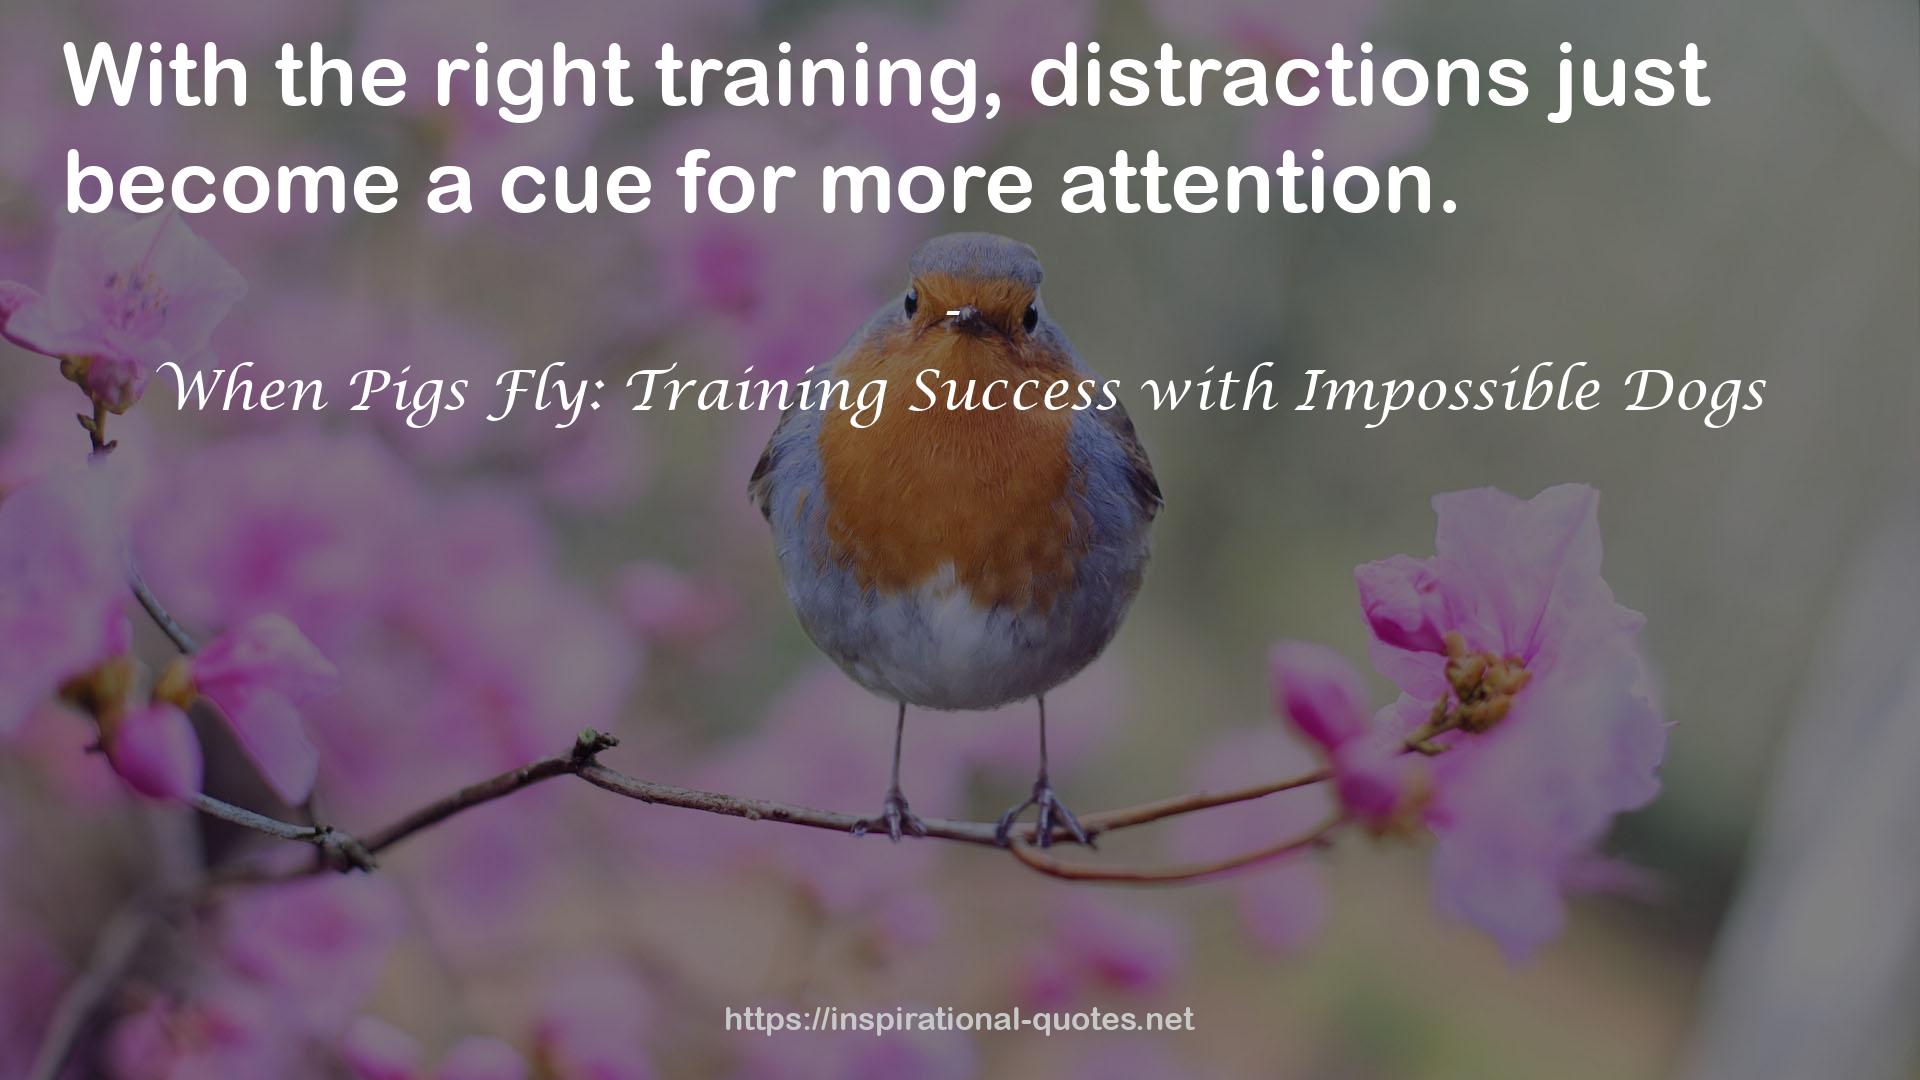 When Pigs Fly: Training Success with Impossible Dogs QUOTES